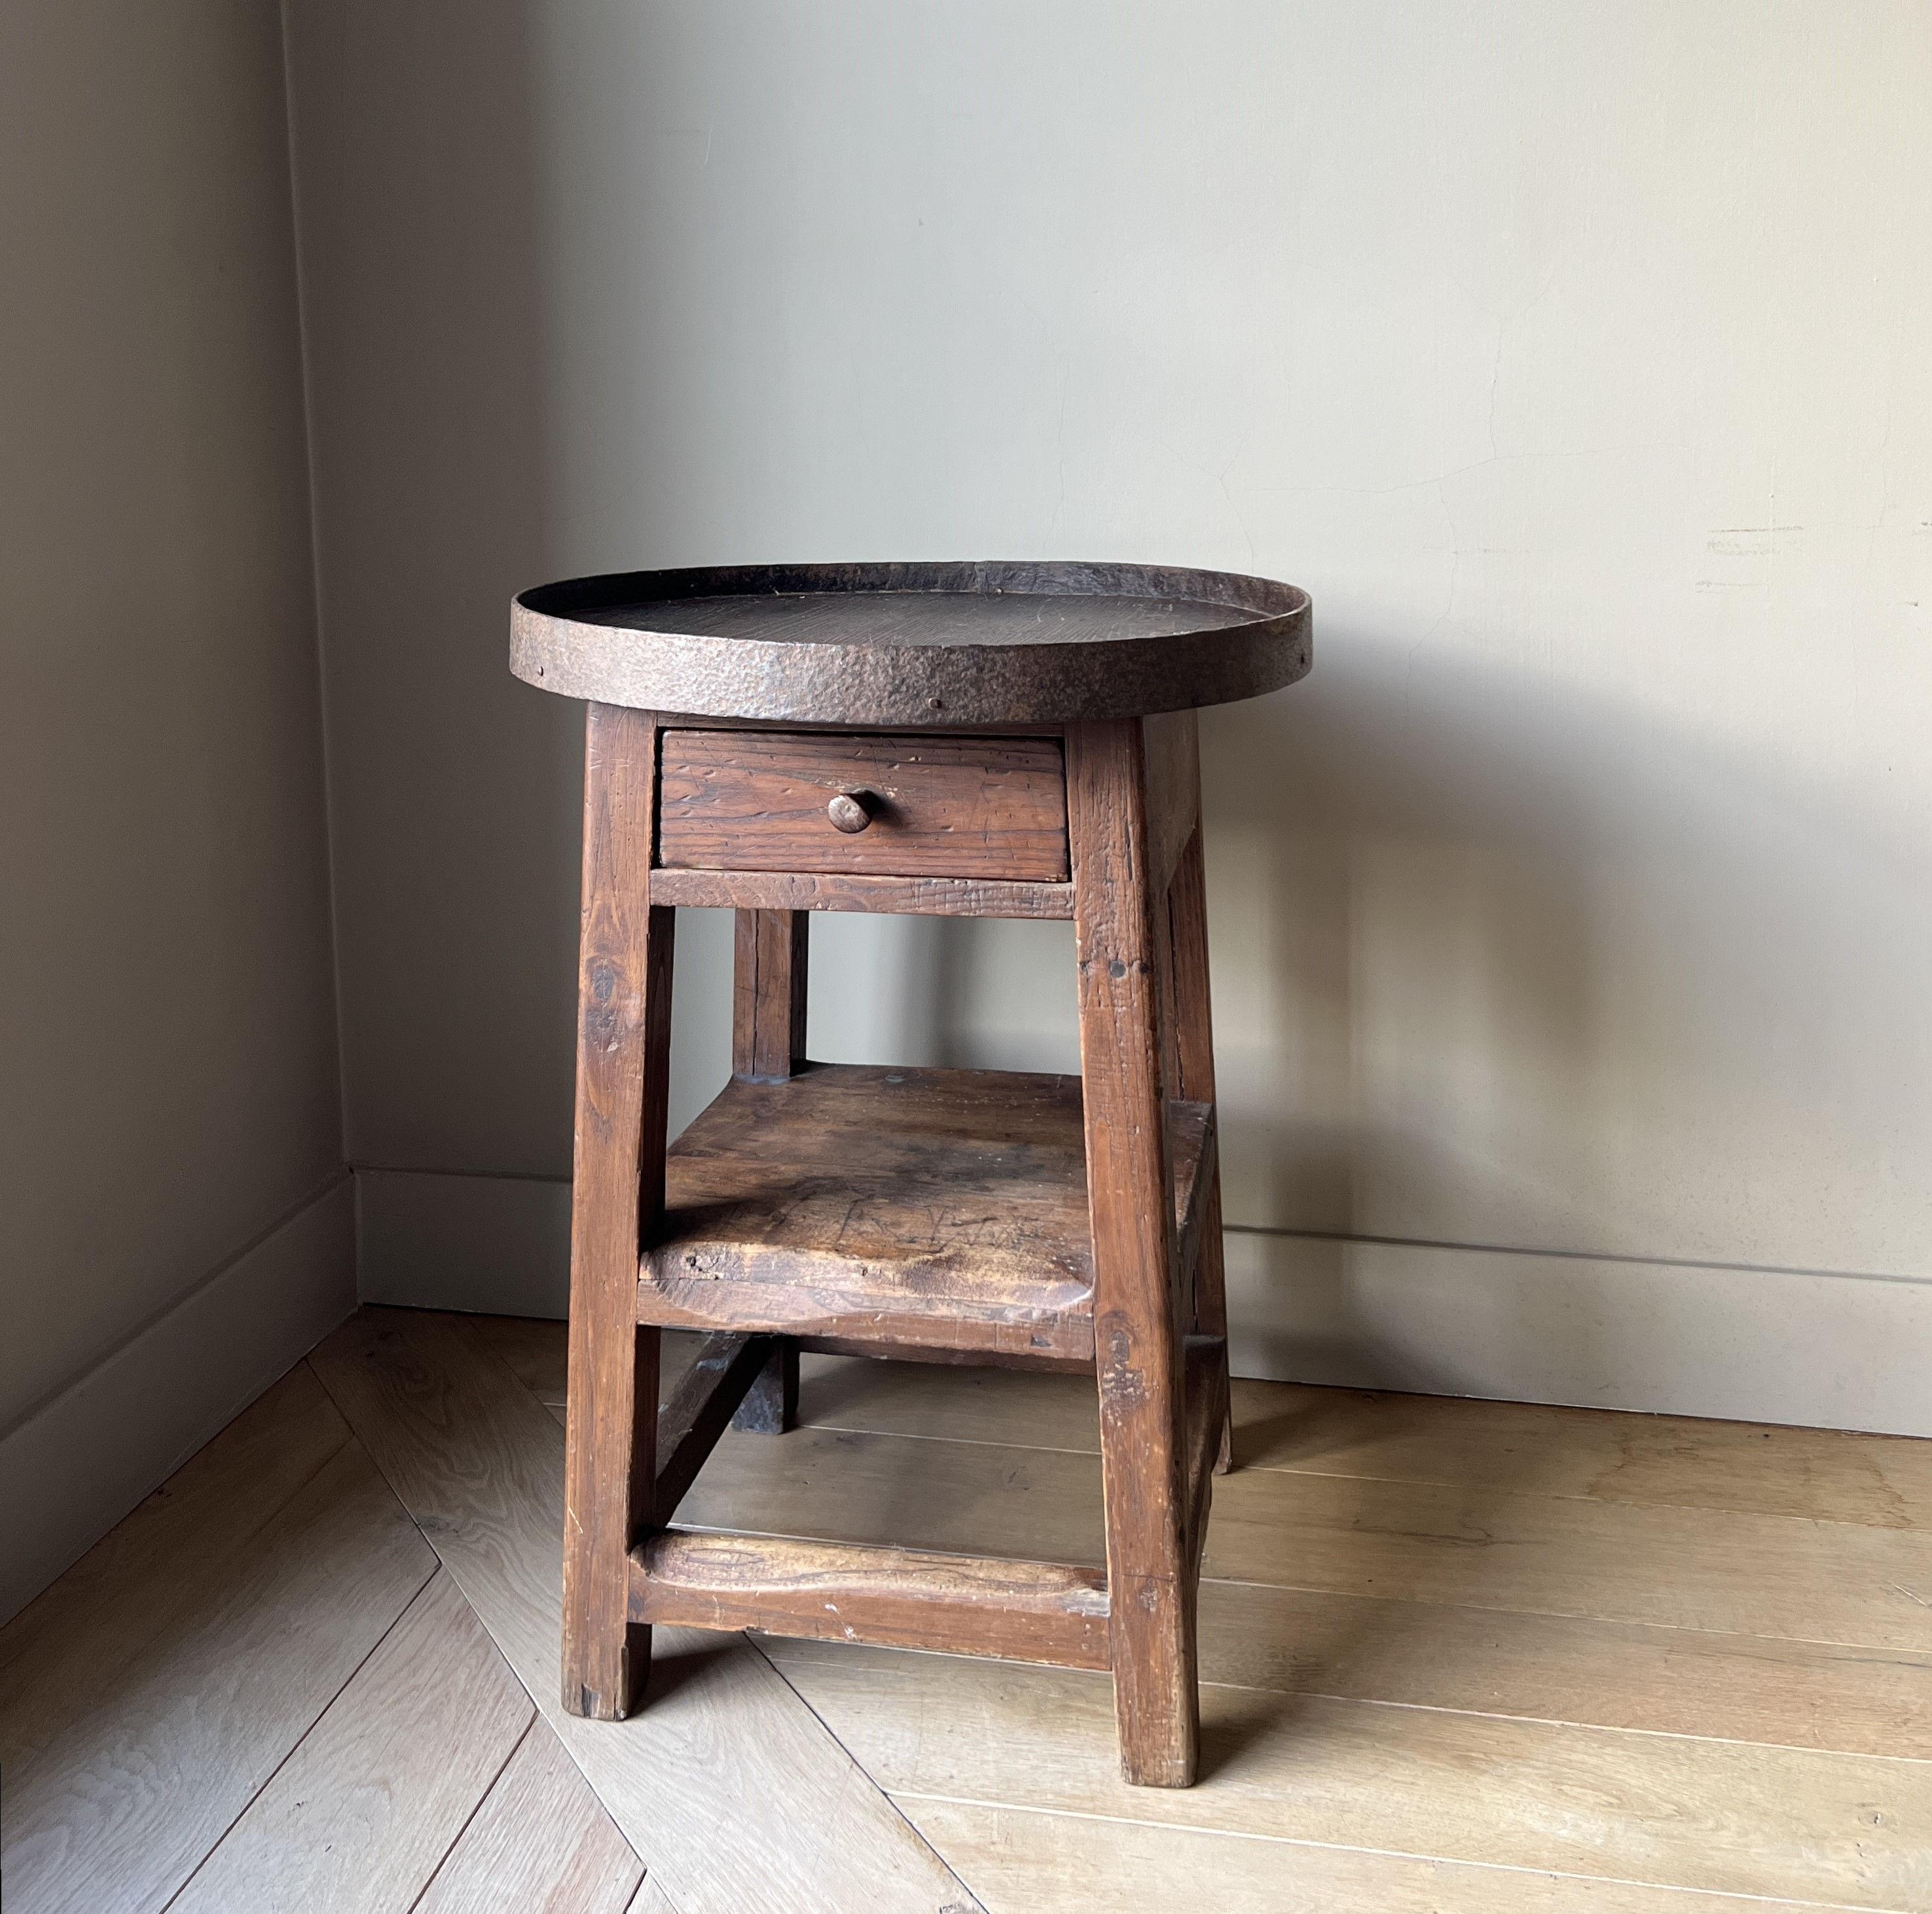 A great little 19th century round table. Originally designed for working (possibly sculptor) the top has small divisons to organise tools. Overall wonderful color and patina and a good proportions. Caould be used as a sidetable or a pedestal. Very